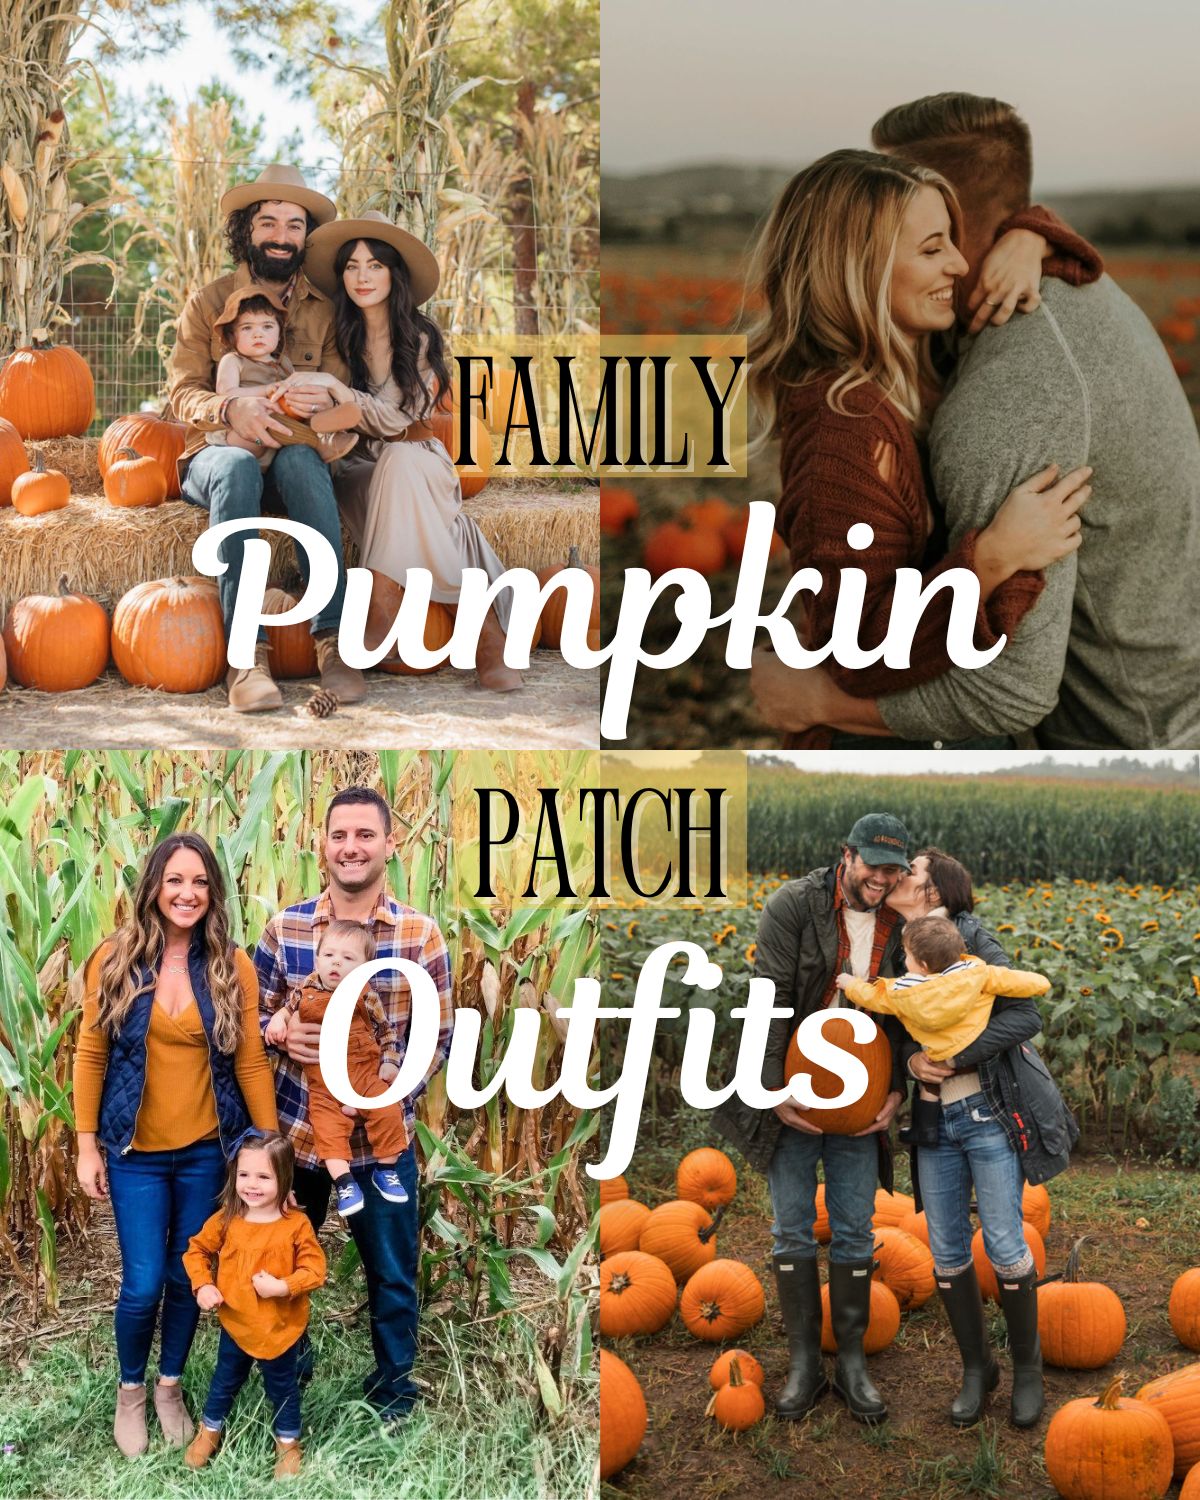 Families posing for family photos in fall outfits at a pumpkin patch